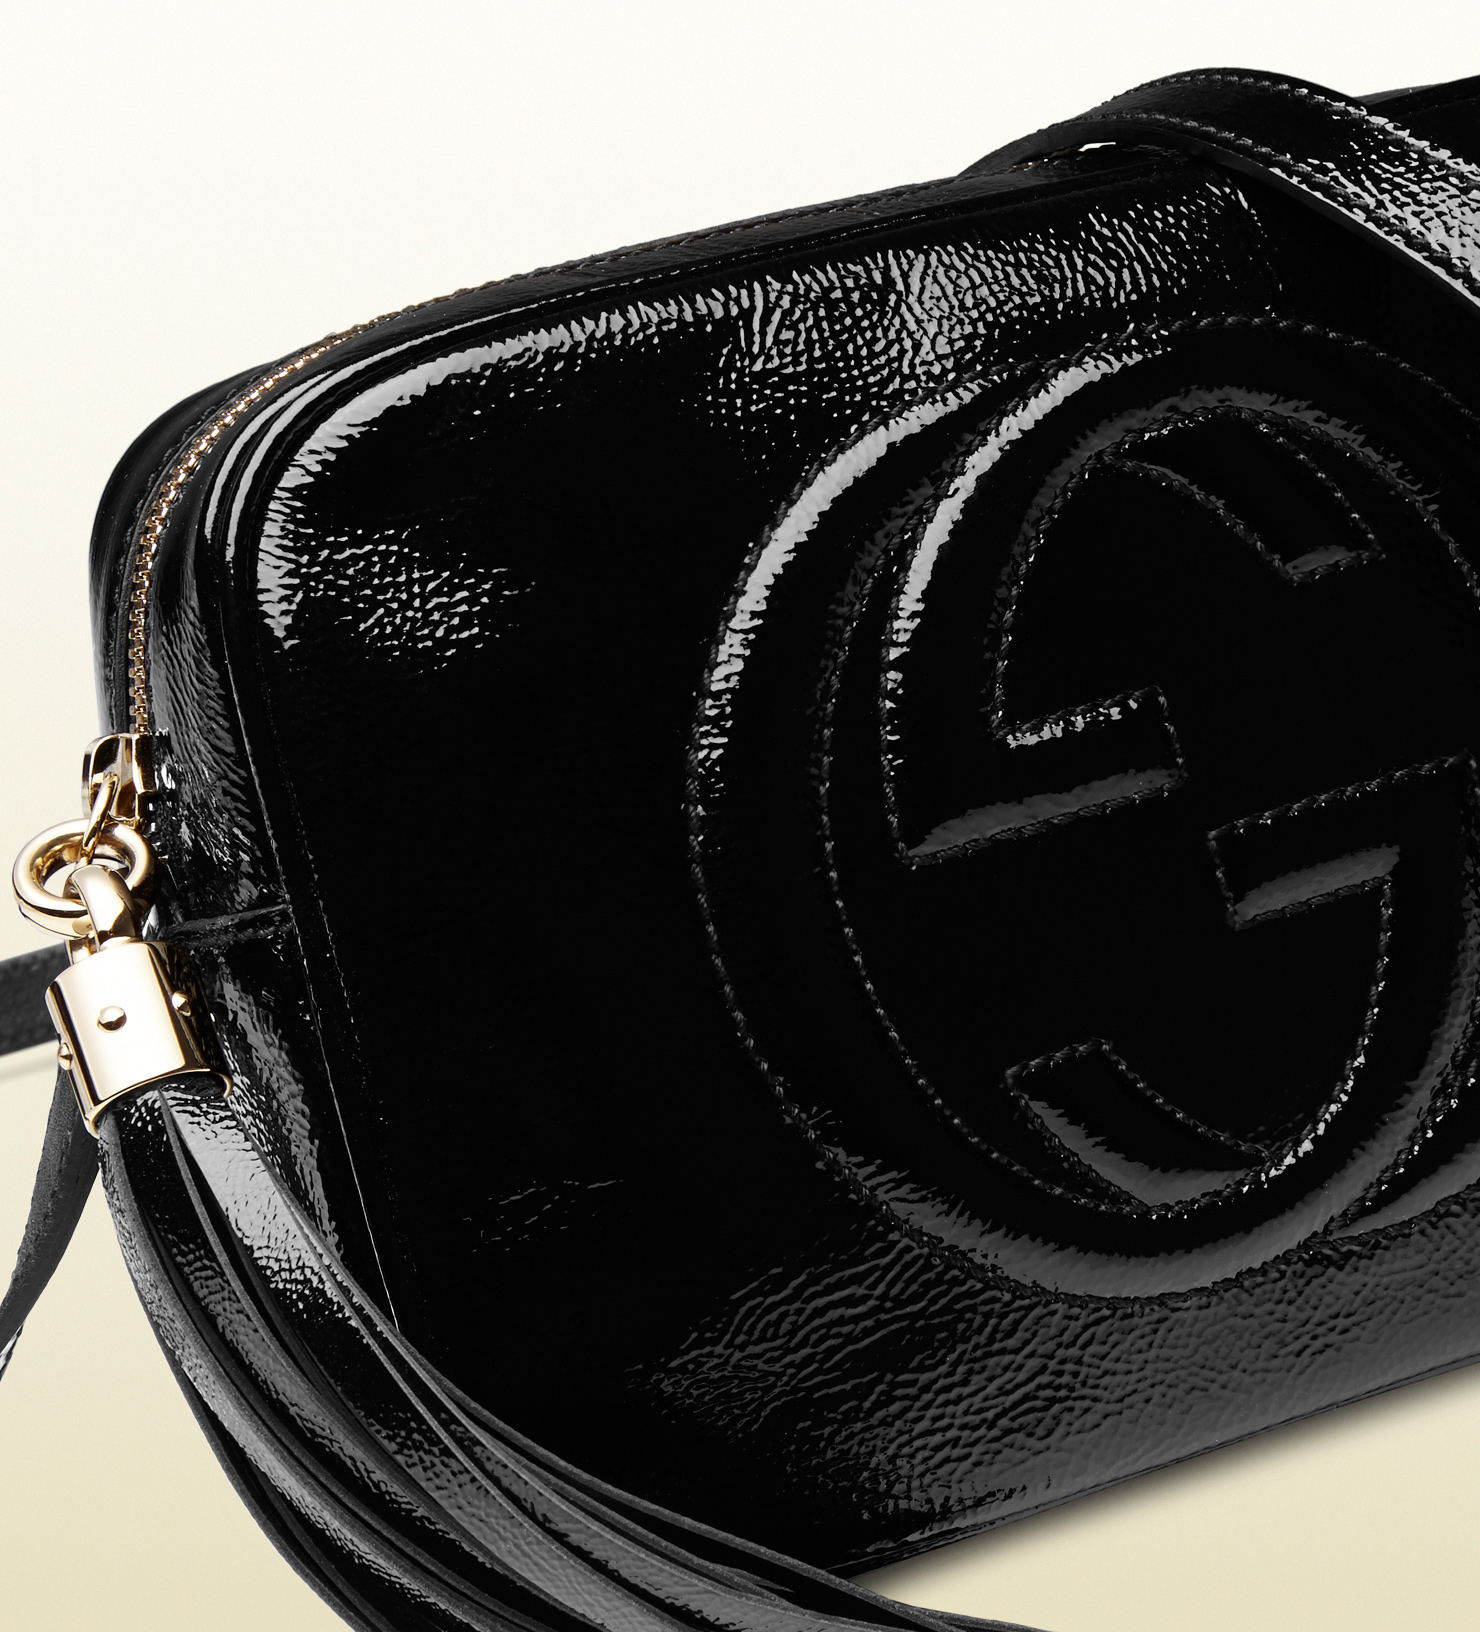 Gucci Soho Soft Patent Leather Disco Bag in Black - Lyst